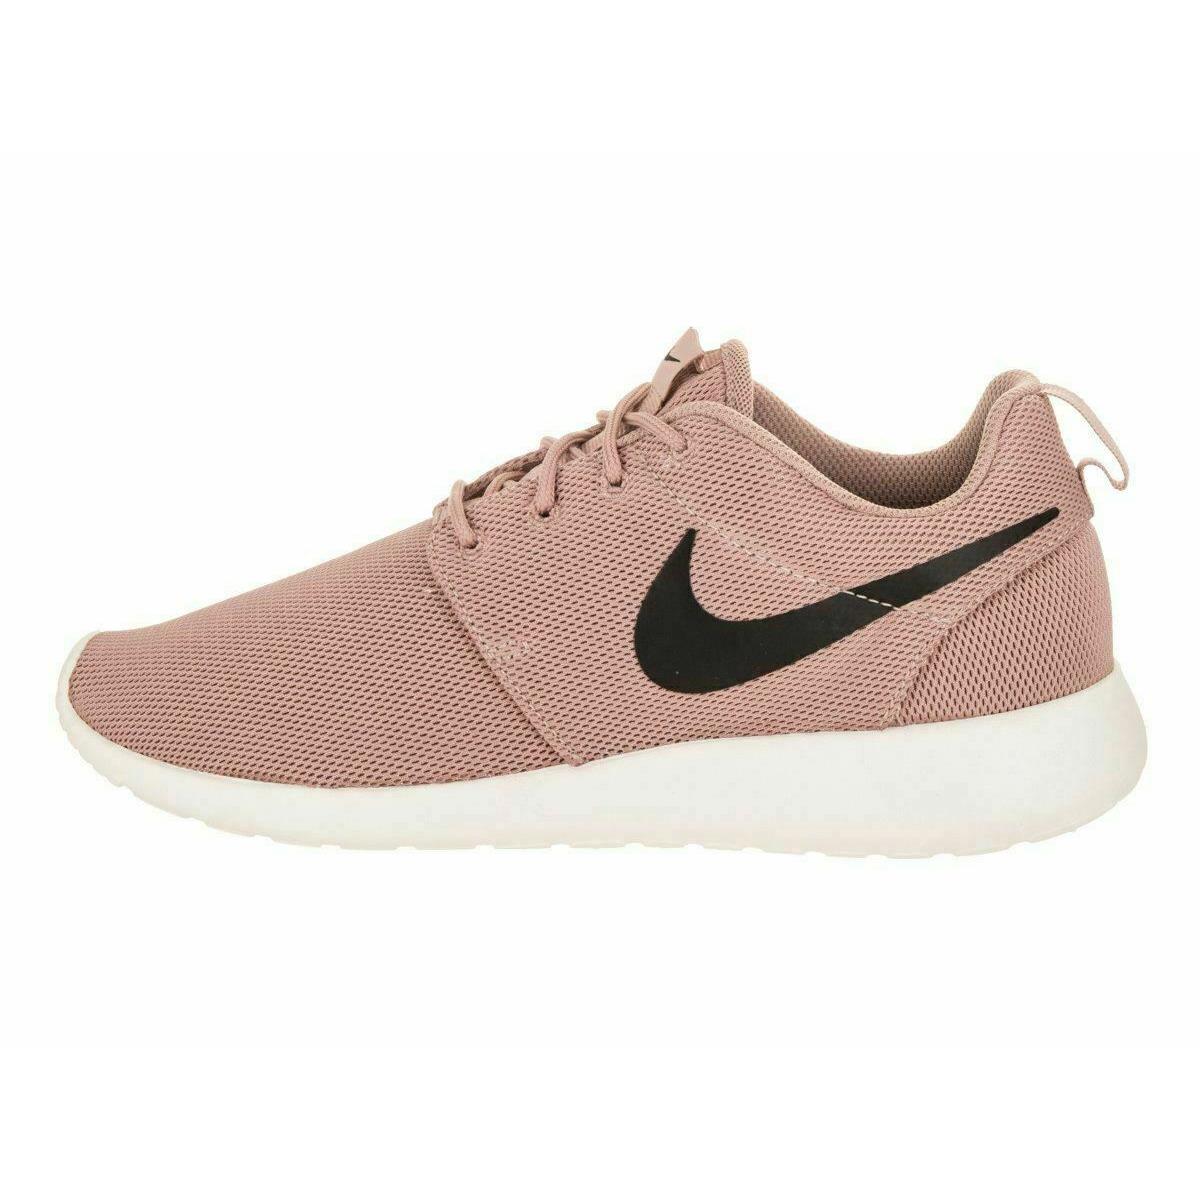 Nike shoes Roshe One - Brown & White 5